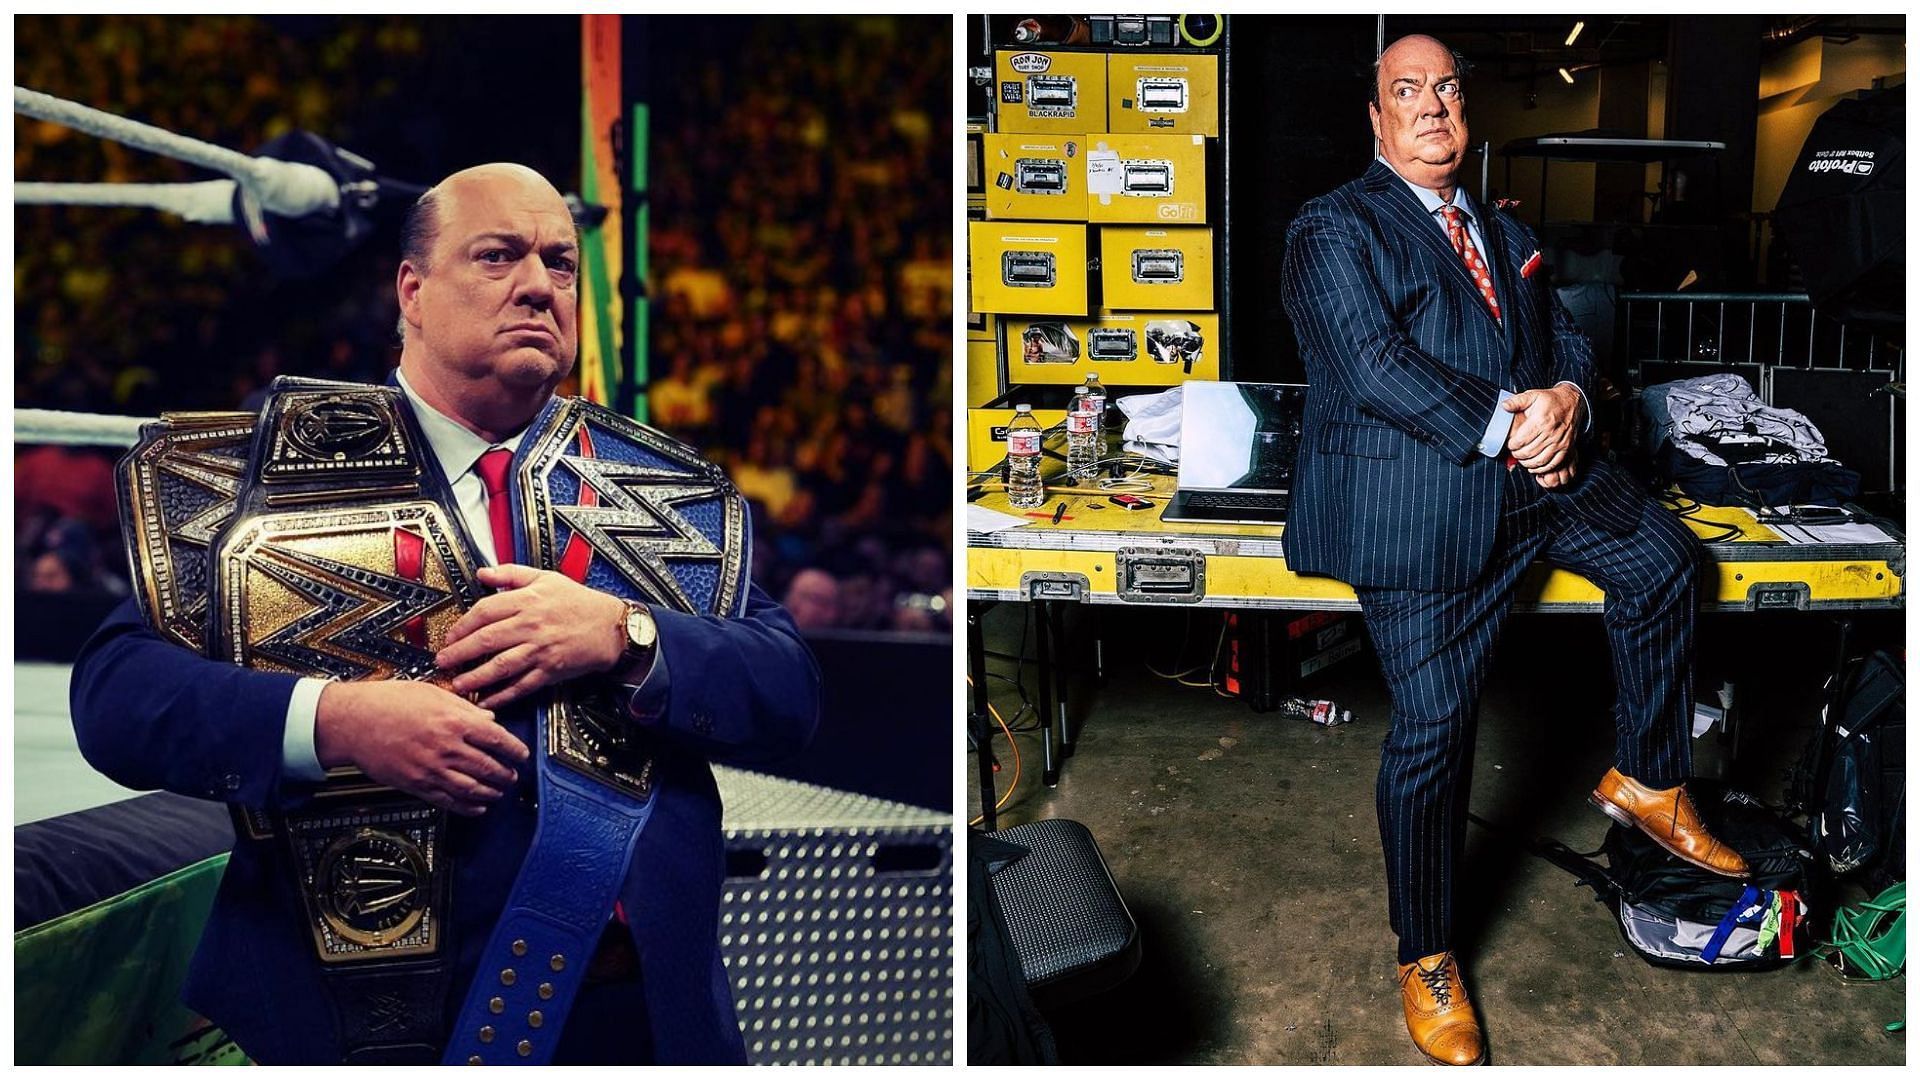 Paul Heyman is Special Counsel to Roman Reigns.